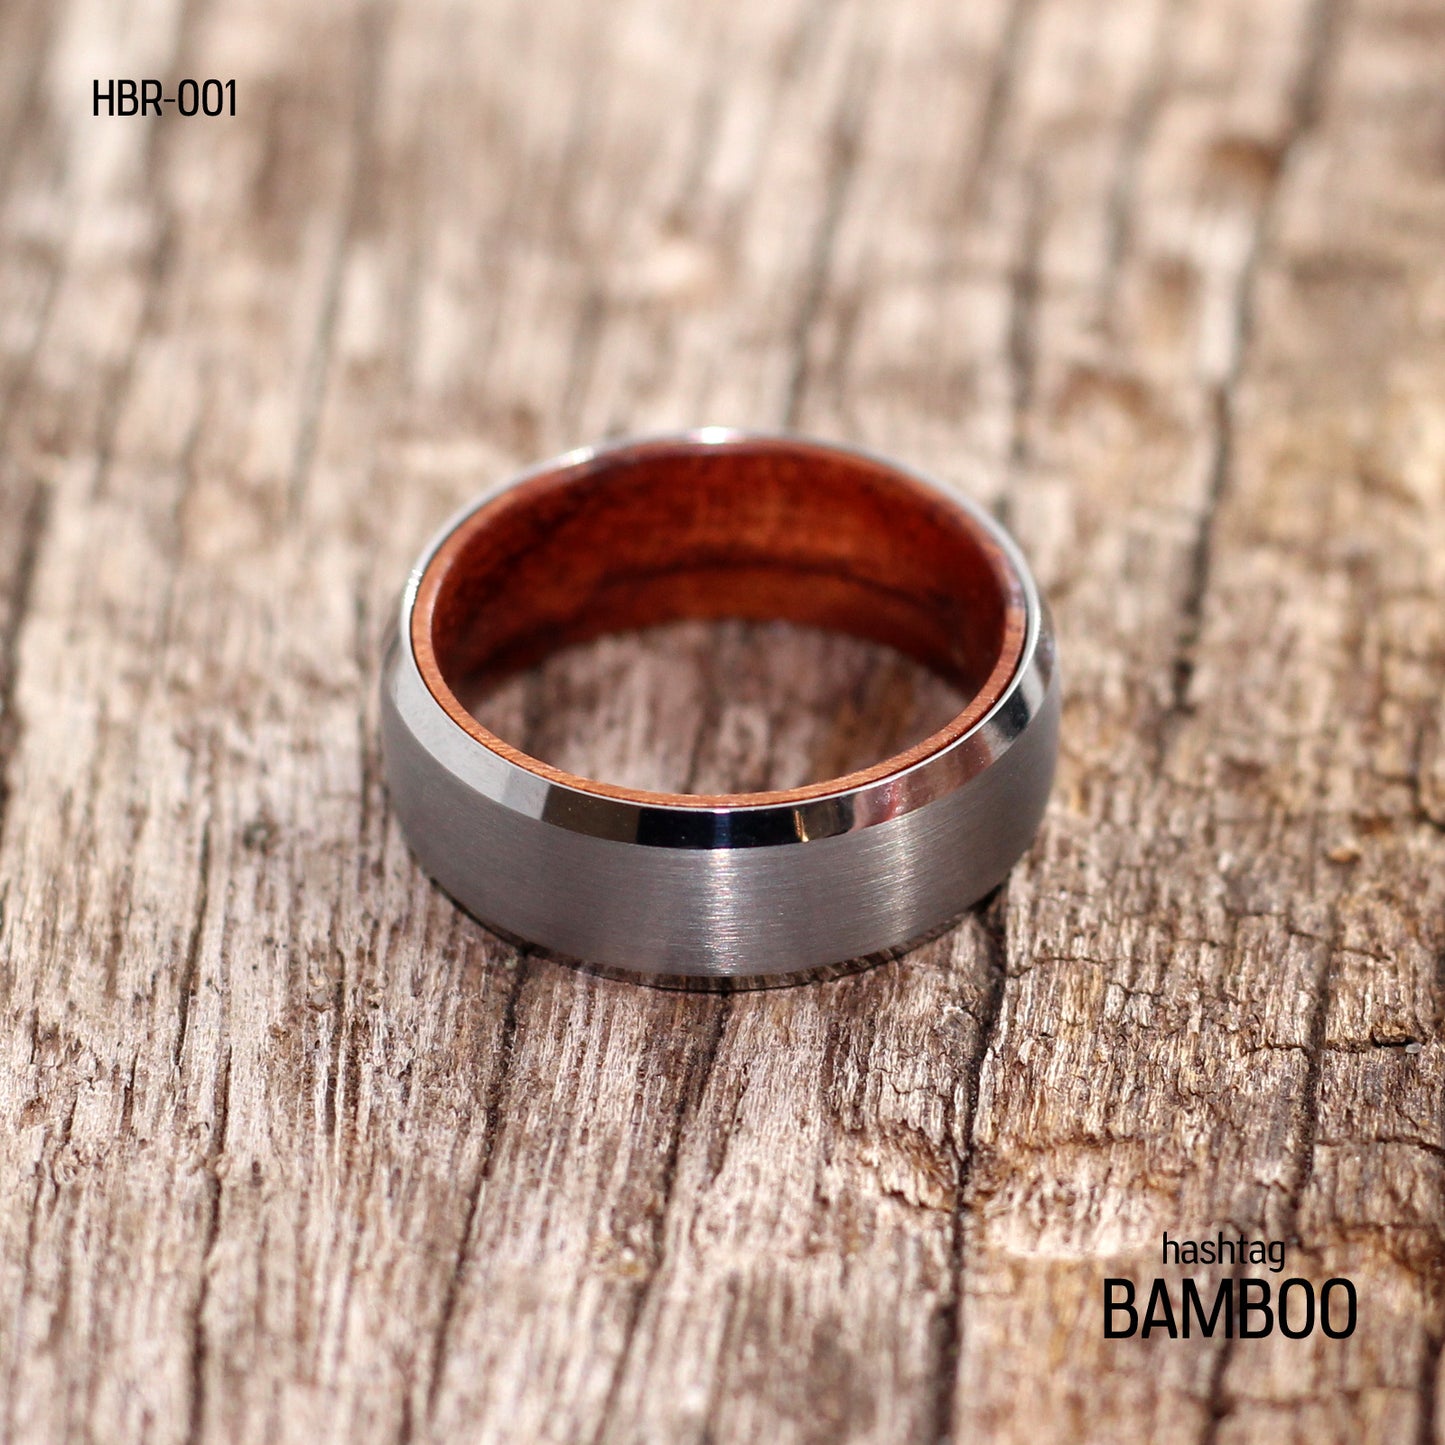 Men's Silver Bevelled Brushed Tungsten Ring with Wood Sleeve - Hashtag Bamboo